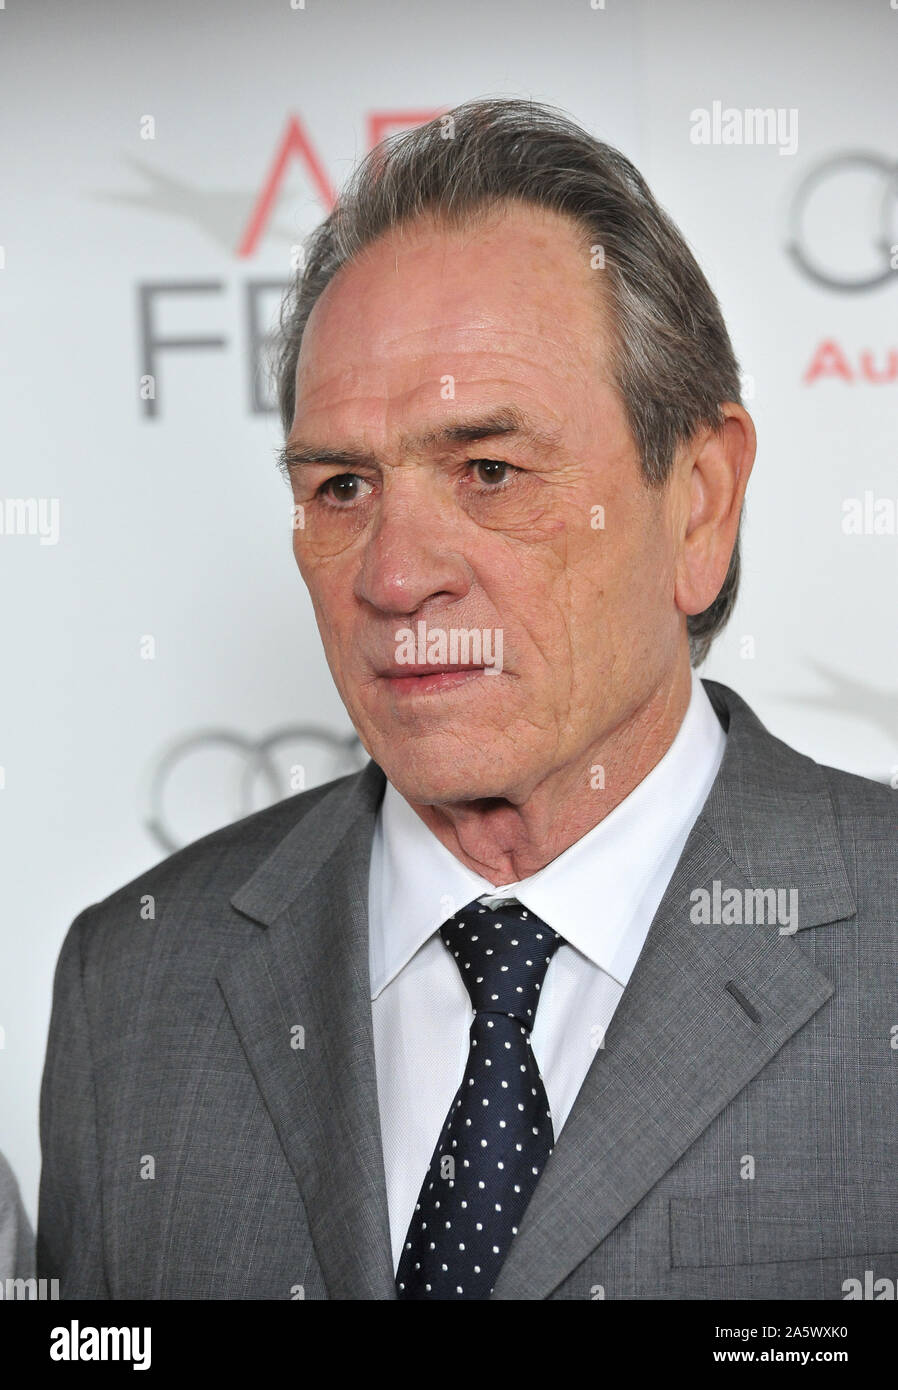 LOS ANGELES, CA. November 08, 2012: Tommy Lee Jones at the AFI Fest premiere of his movie 'Lincoln' at Grauman's Chinese Theatre, Hollywood. © 2012 Paul Smith / Featureflash Stock Photo